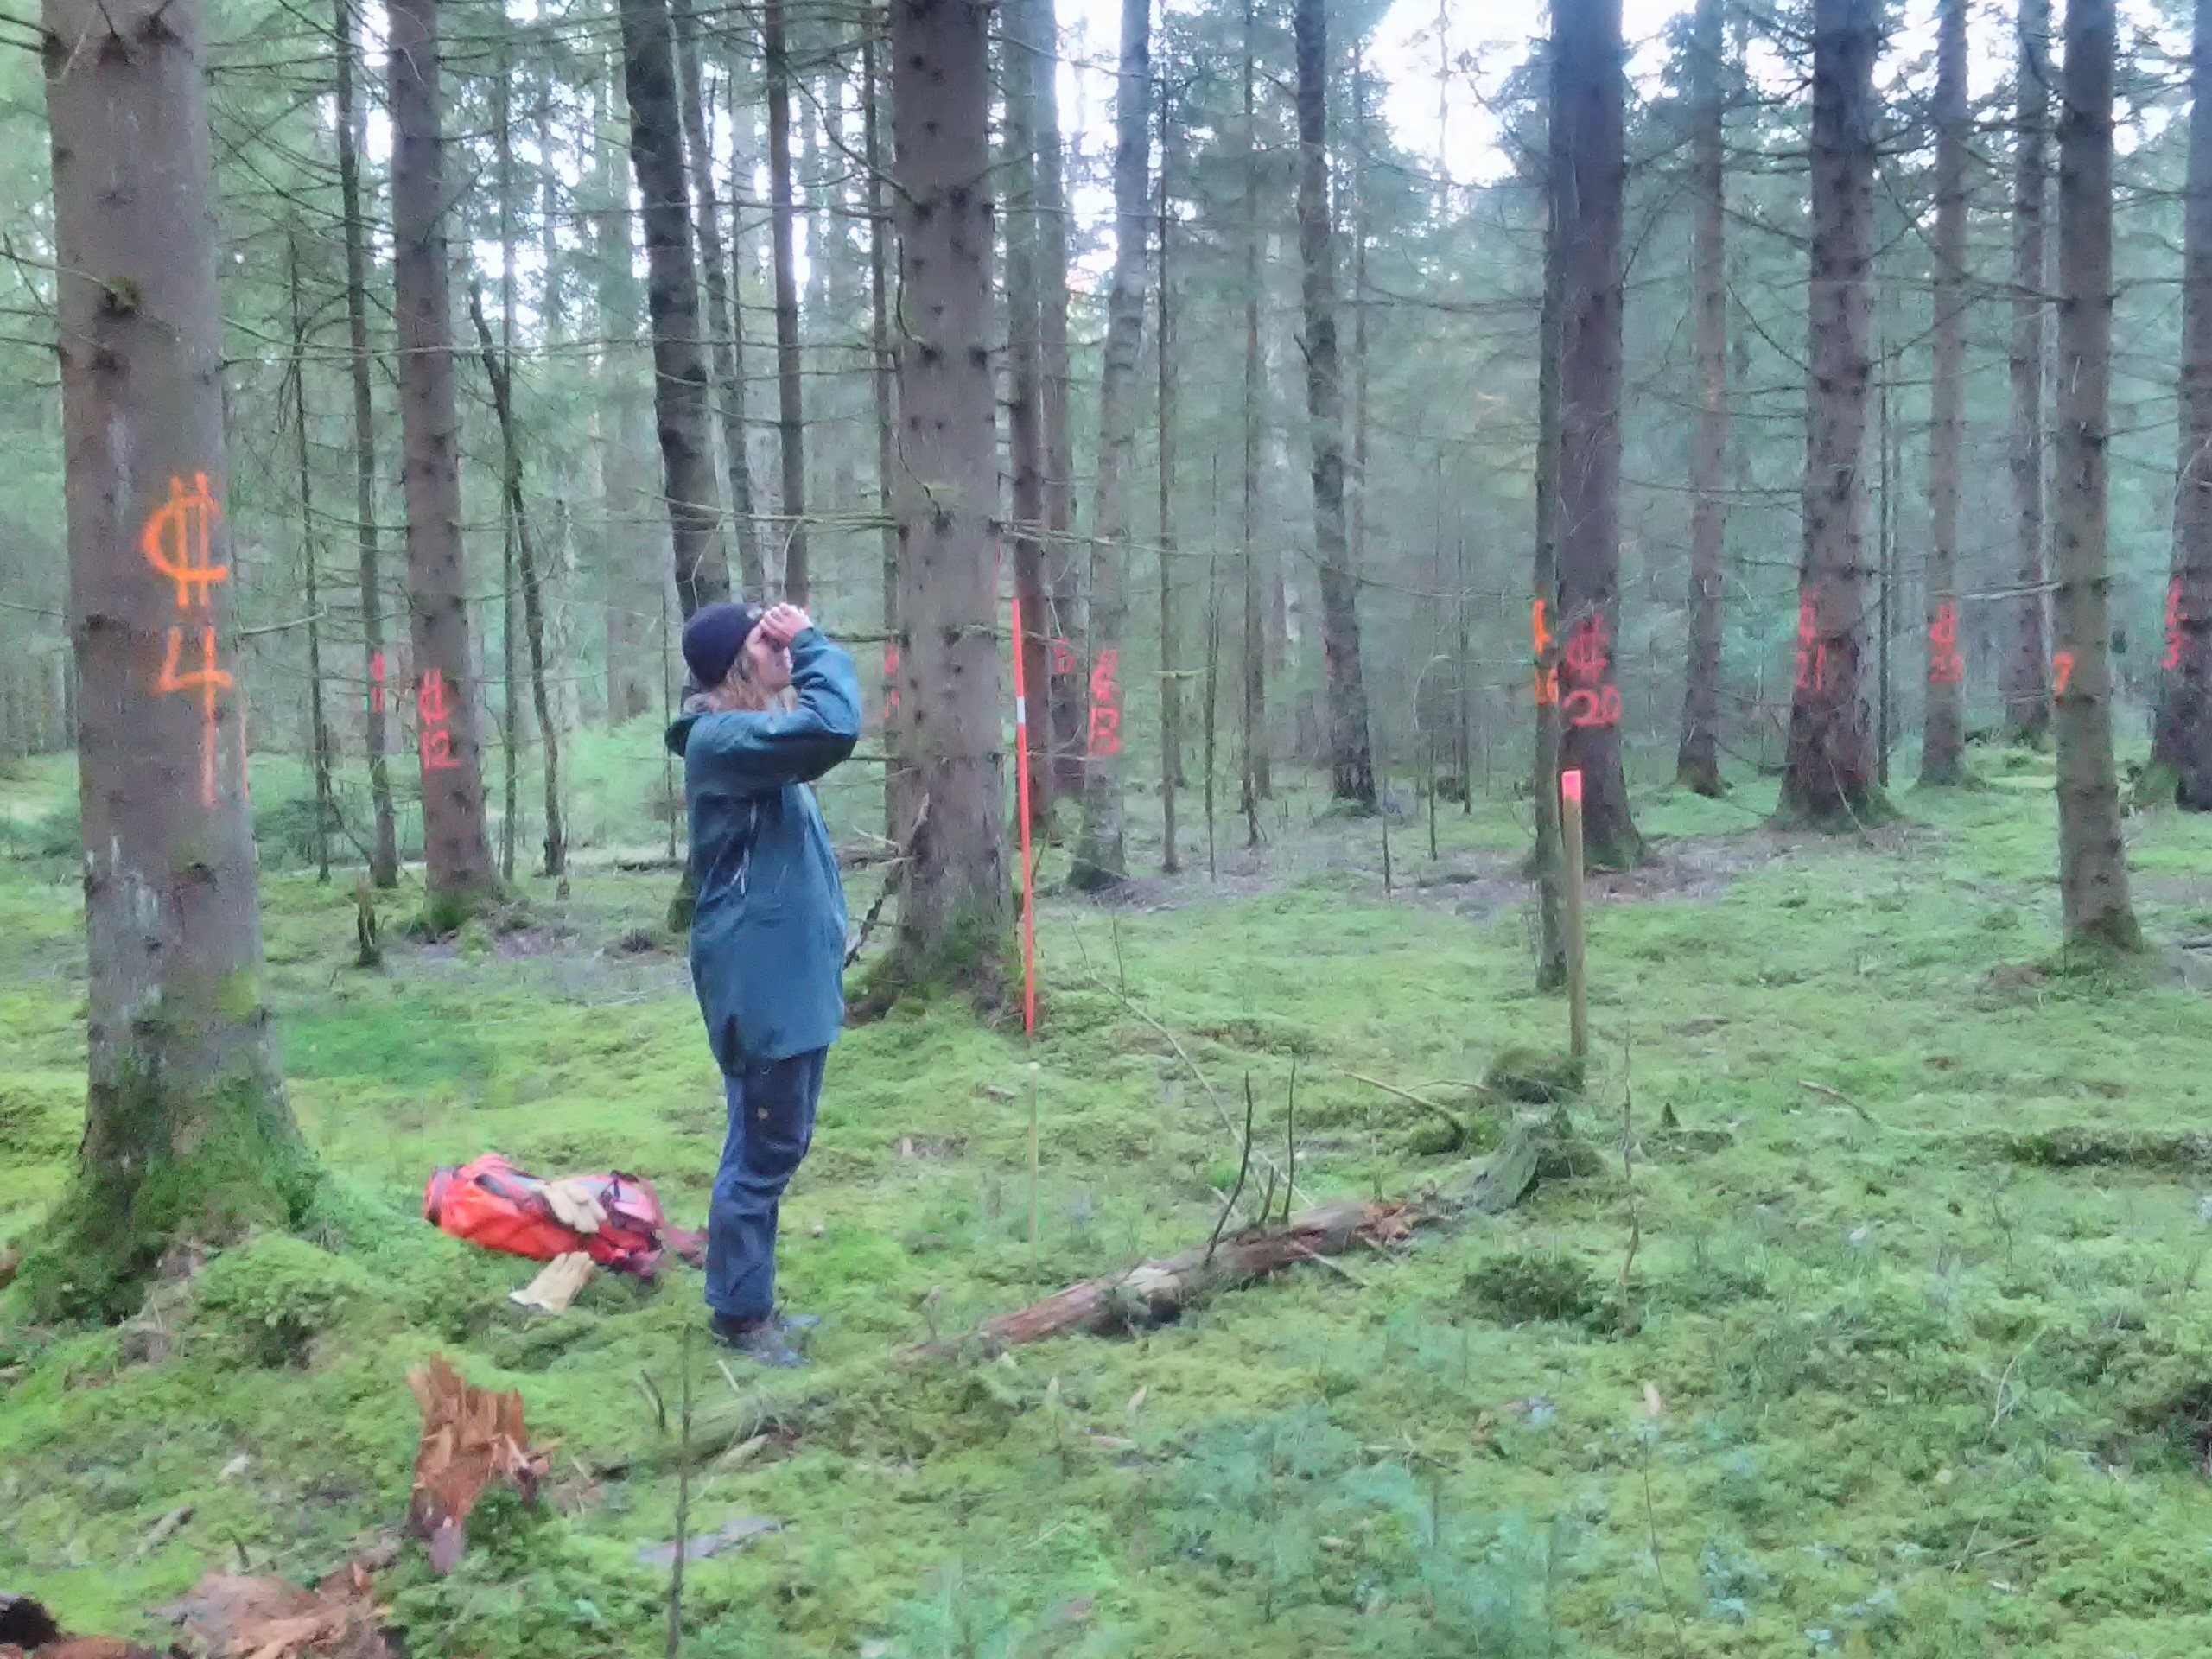 PhD student Ulrika Ervander is measuring tree heights in the spruce forest at Skogaryd Research Catchment. Individual trees are marked to allow identification for later remeasuring the trees to follow